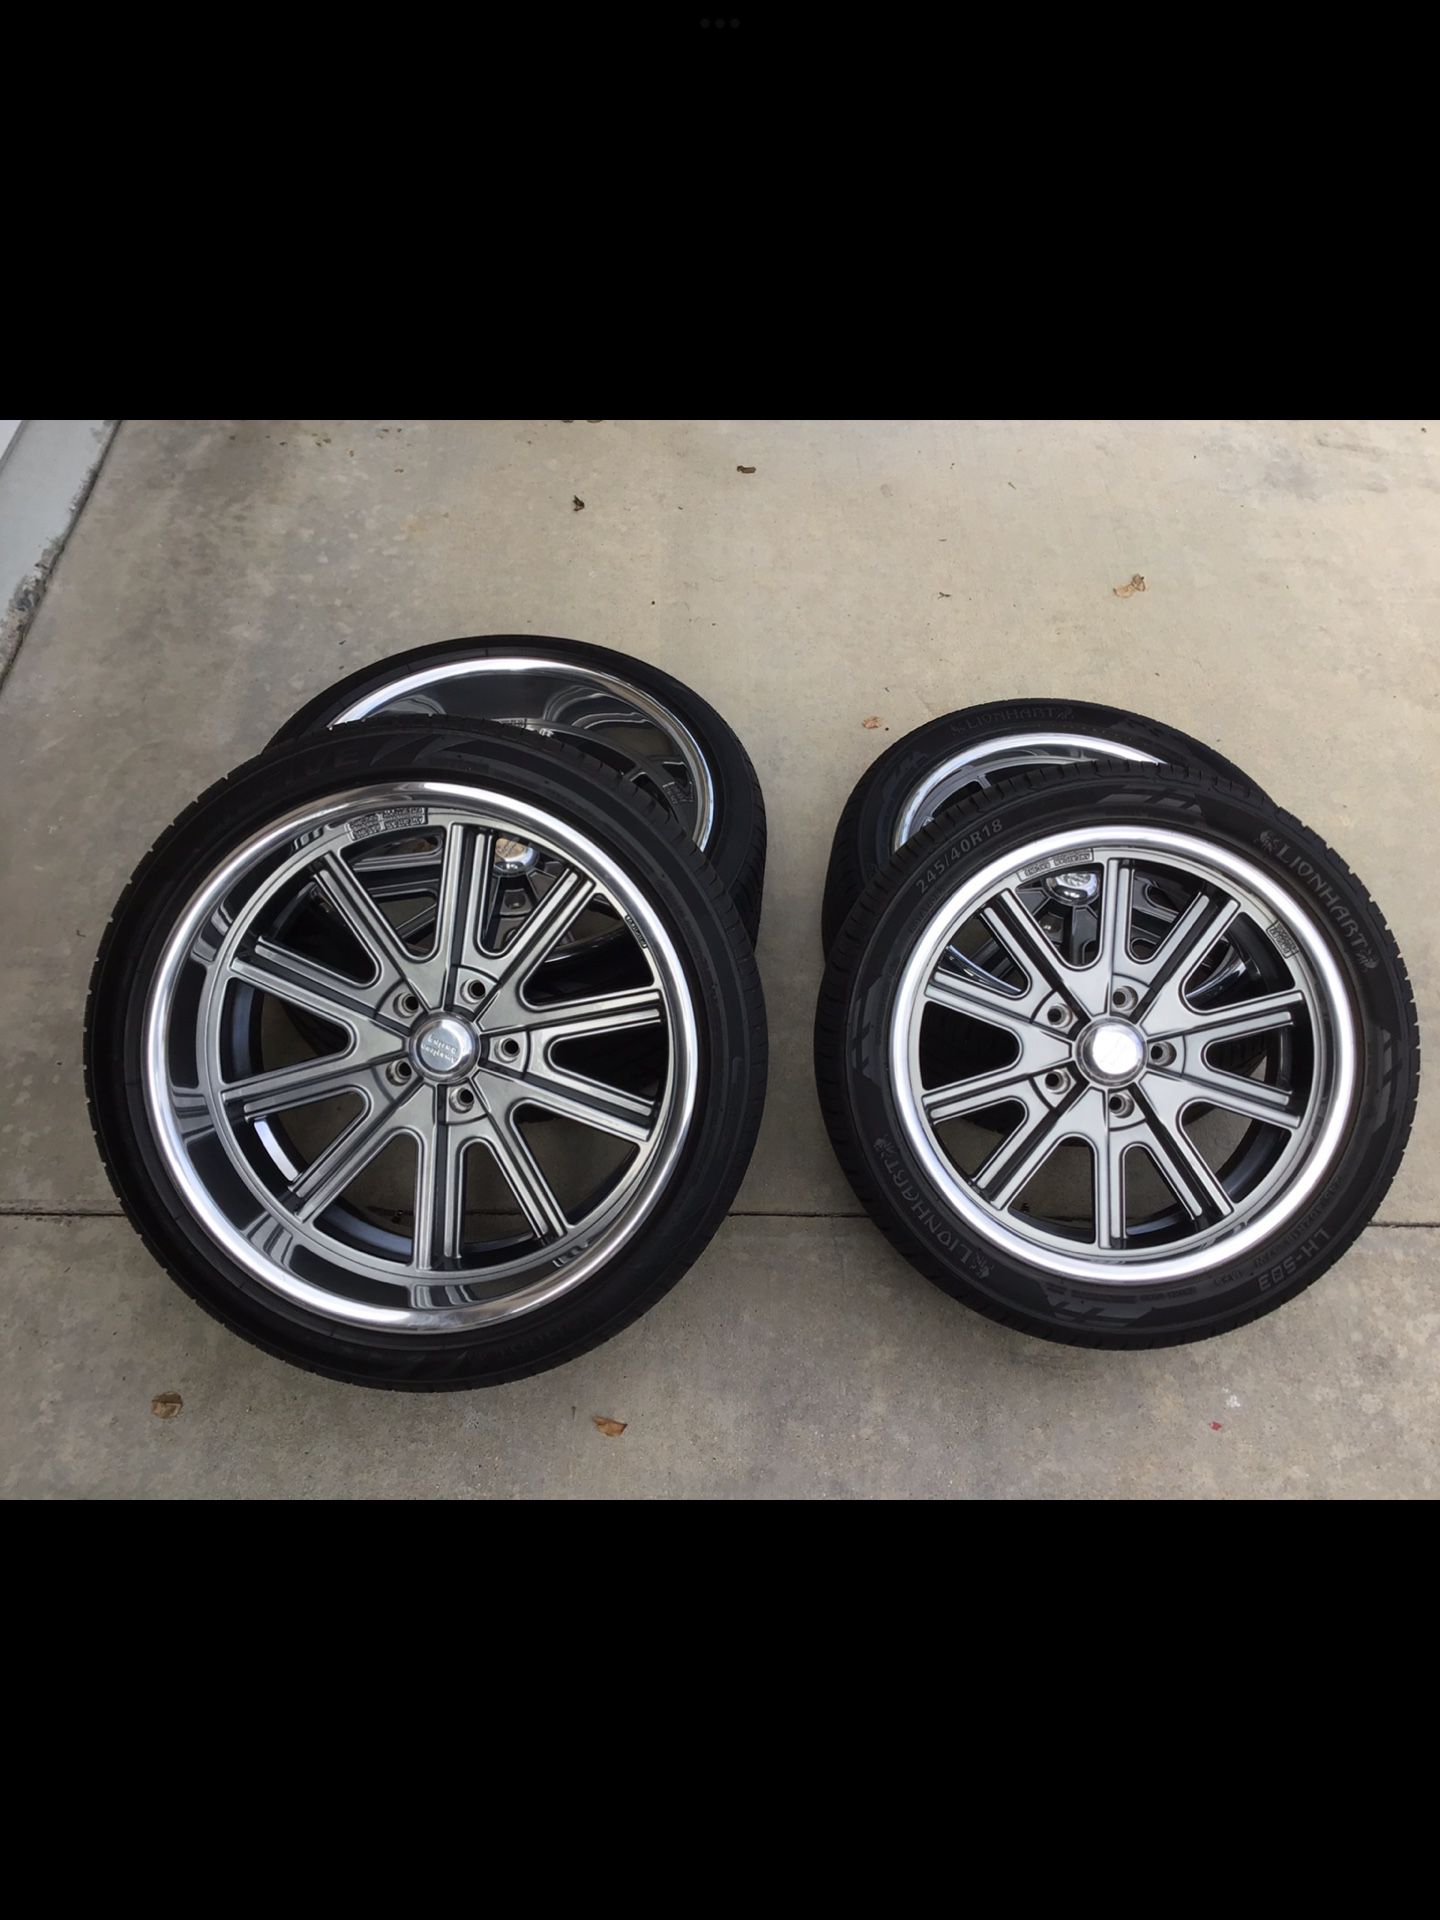 C10 Parts American Racing Rims “Shelby”